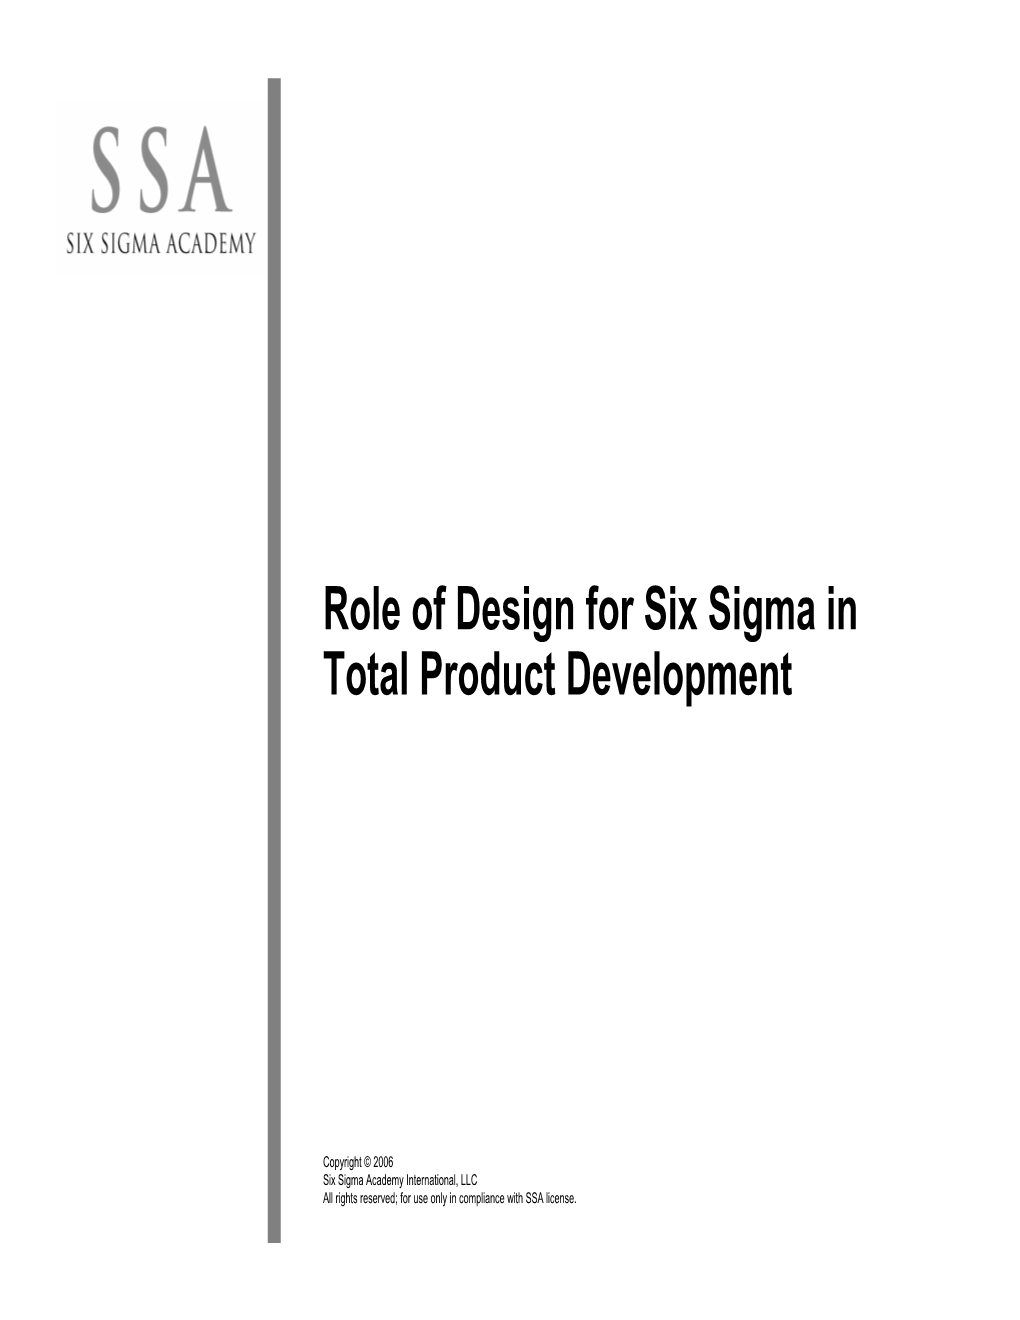 Role of Design for Six Sigma in Total Product Development